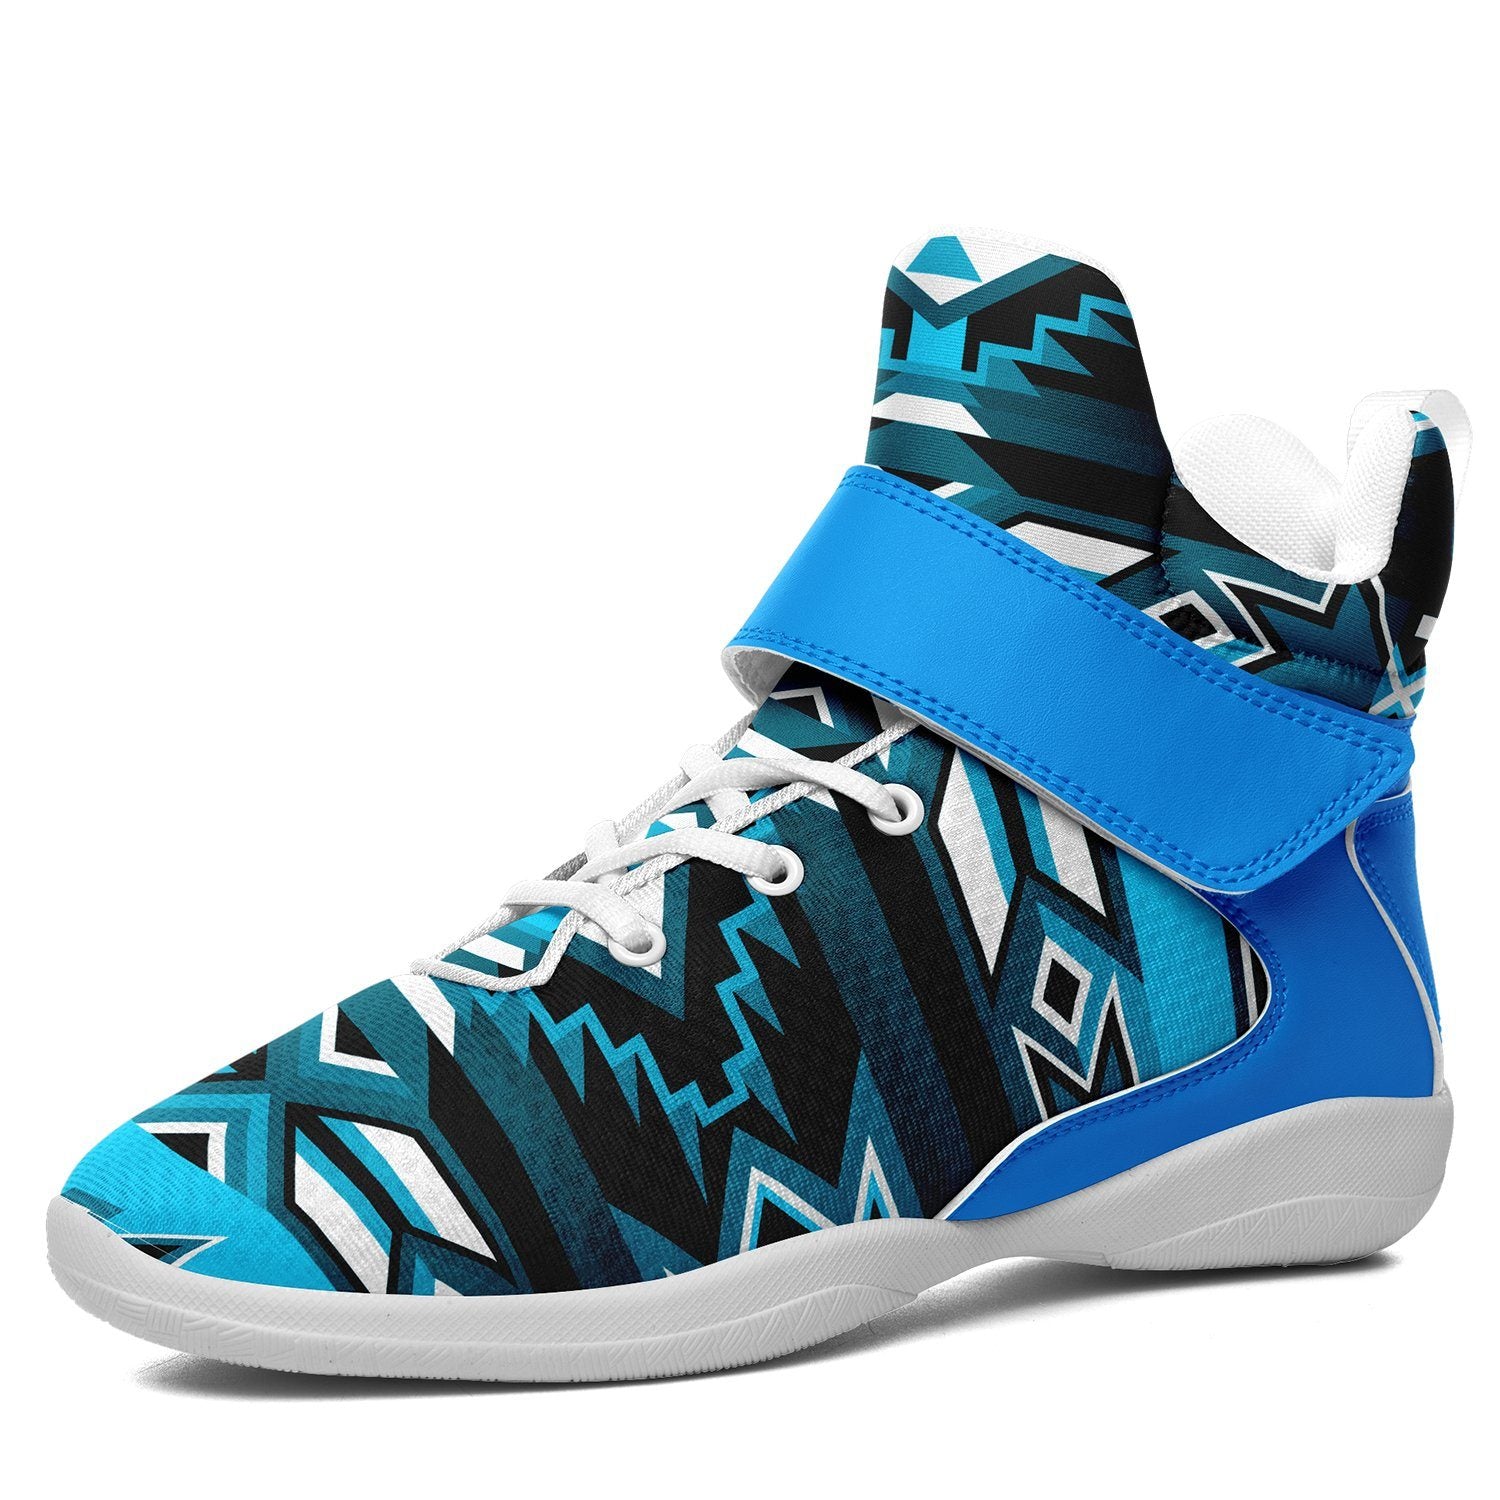 Northern Journey Ipottaa Basketball / Sport High Top Shoes 49 Dzine US Women 4.5 / US Youth 3.5 / EUR 35 White Sole with Light Blue Strap 